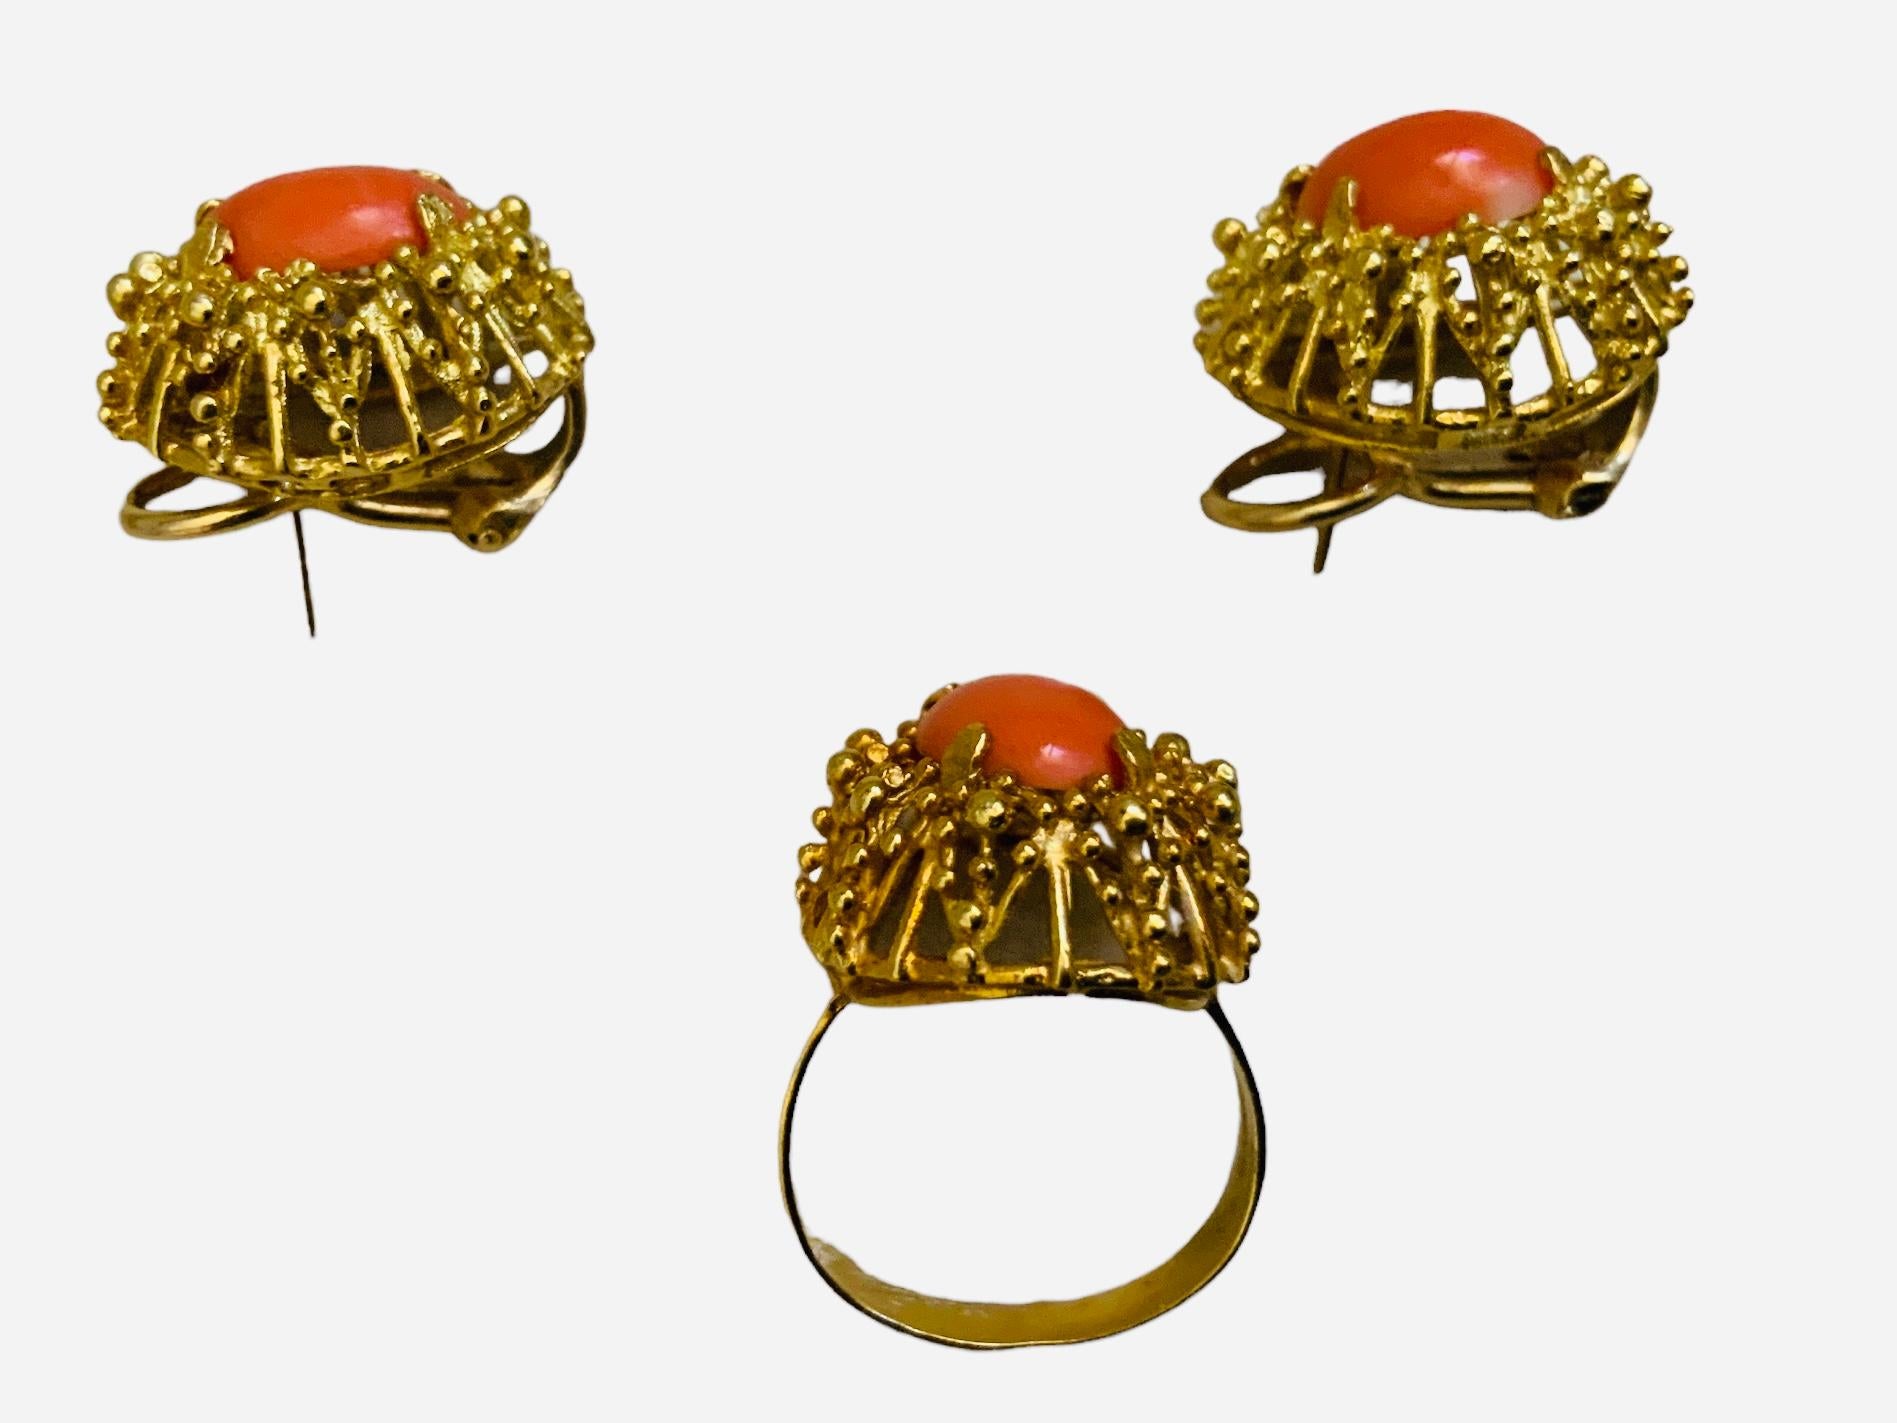 This is a Set of 18K yellow gold Corletto Coral Earrings and Cocktail Ring. It depicts an oval shaped cabochon small Coral mounted in gold prong setting and surrounded by a wreath made of spikes with tiny beads. The ring is signed Italy and 18K in